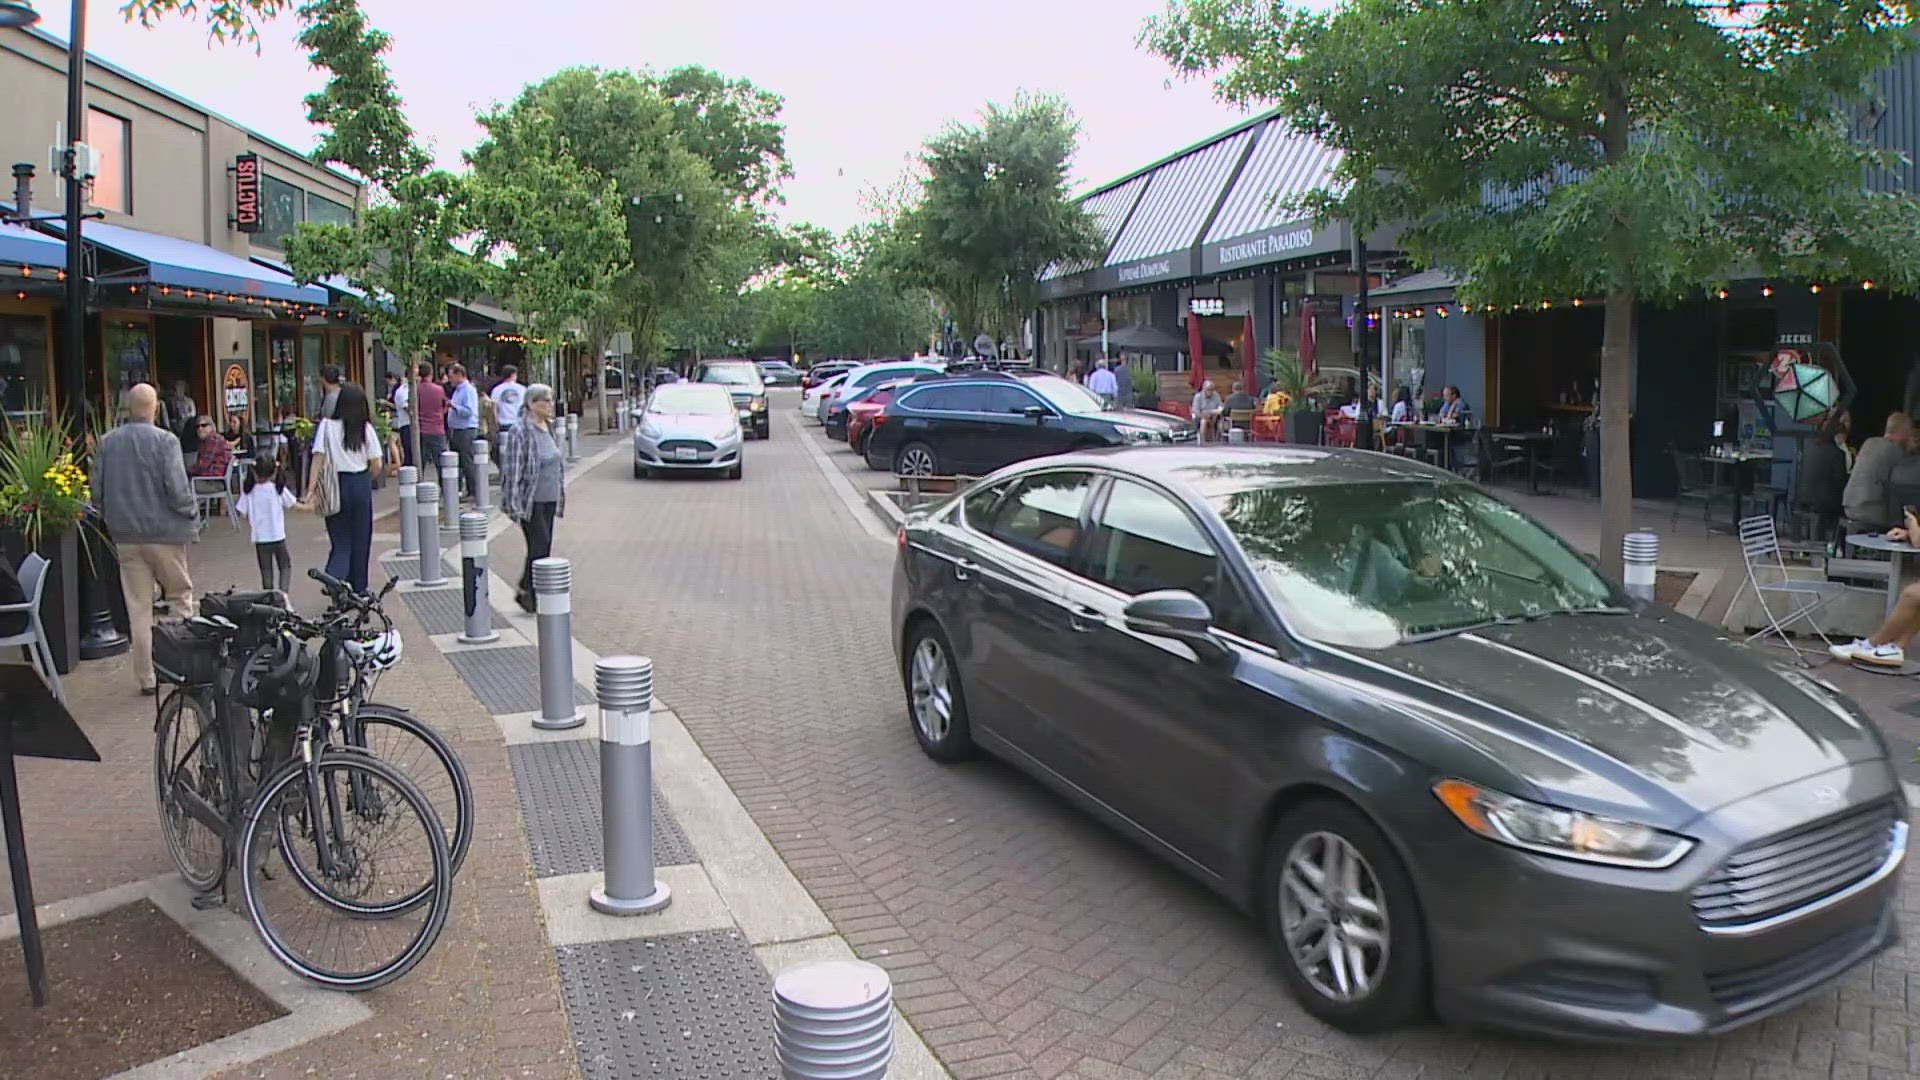 A fiery debate is creating friction in the city of Kirkland as city staff consider shutting down Park Lane to traffic. Businesses are fighting back.